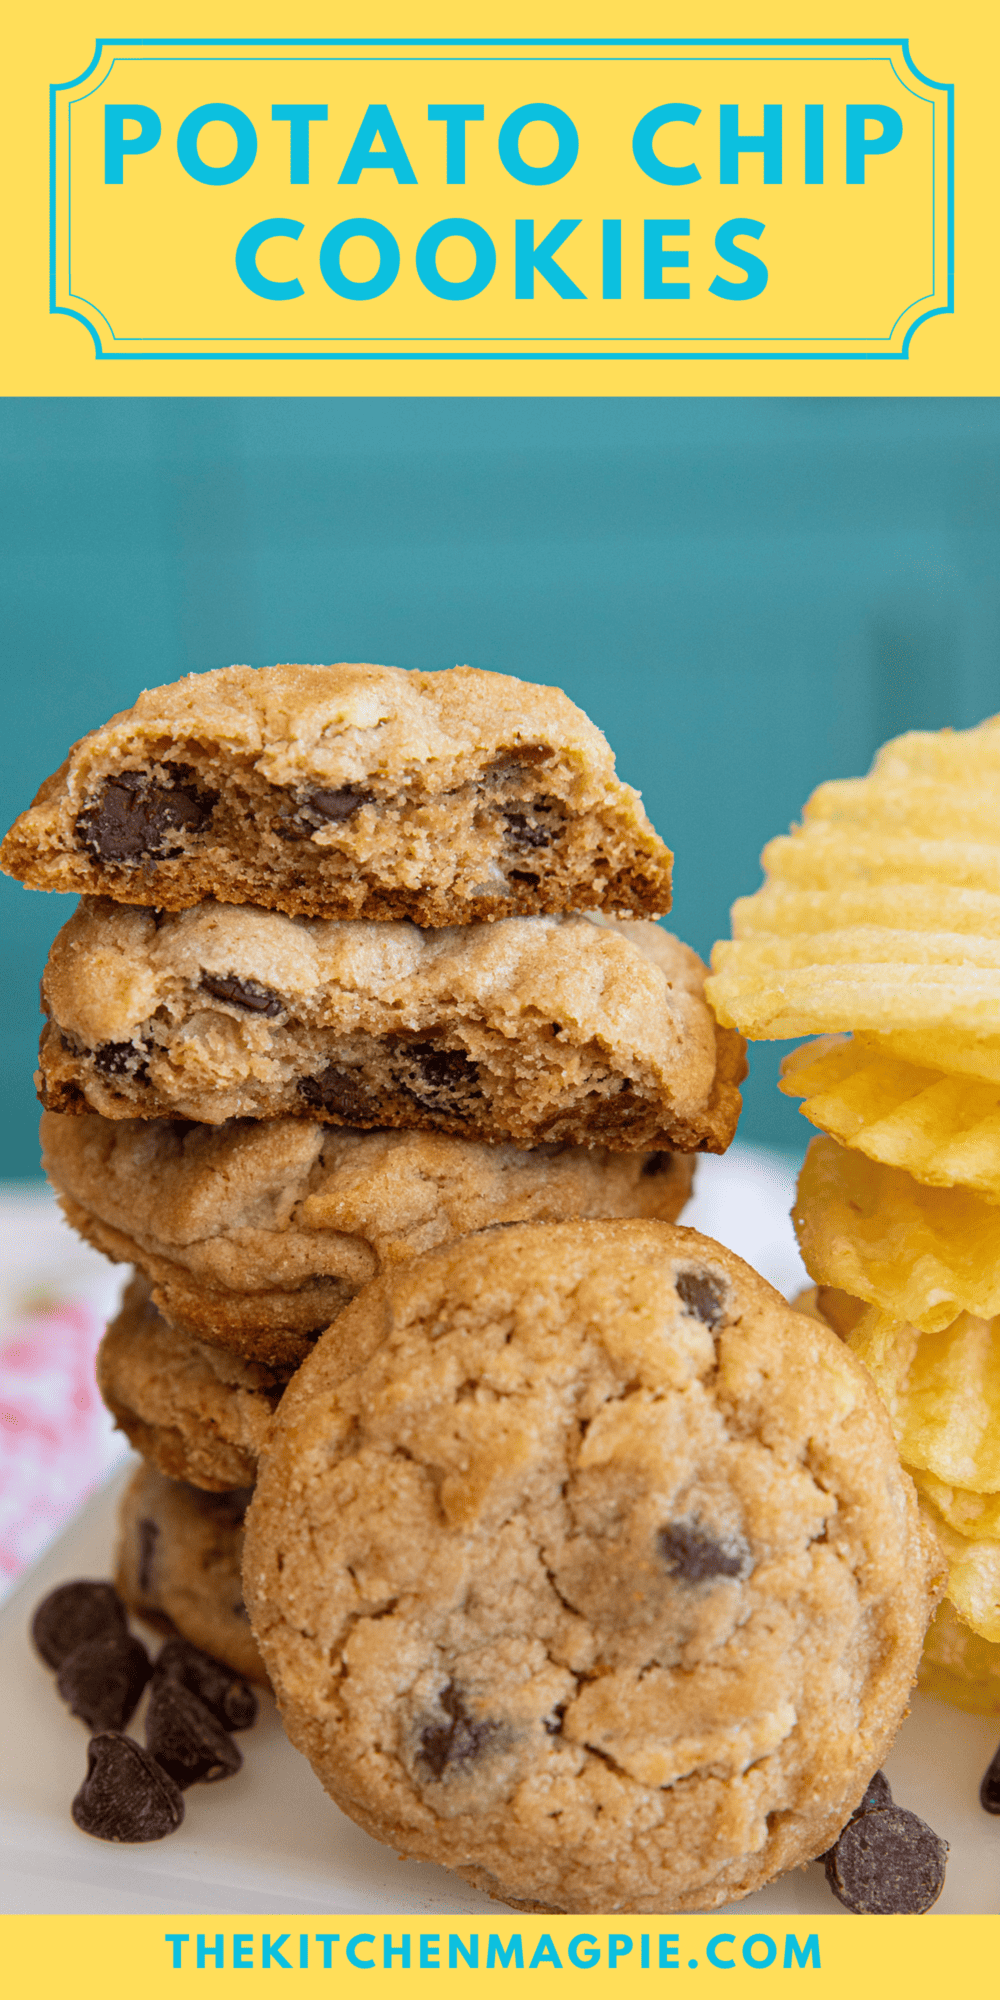 Ruffled potato chips, peanut butter and chocolate chips make these the ultimate potato chip cookies recipe! Sweet and salty!